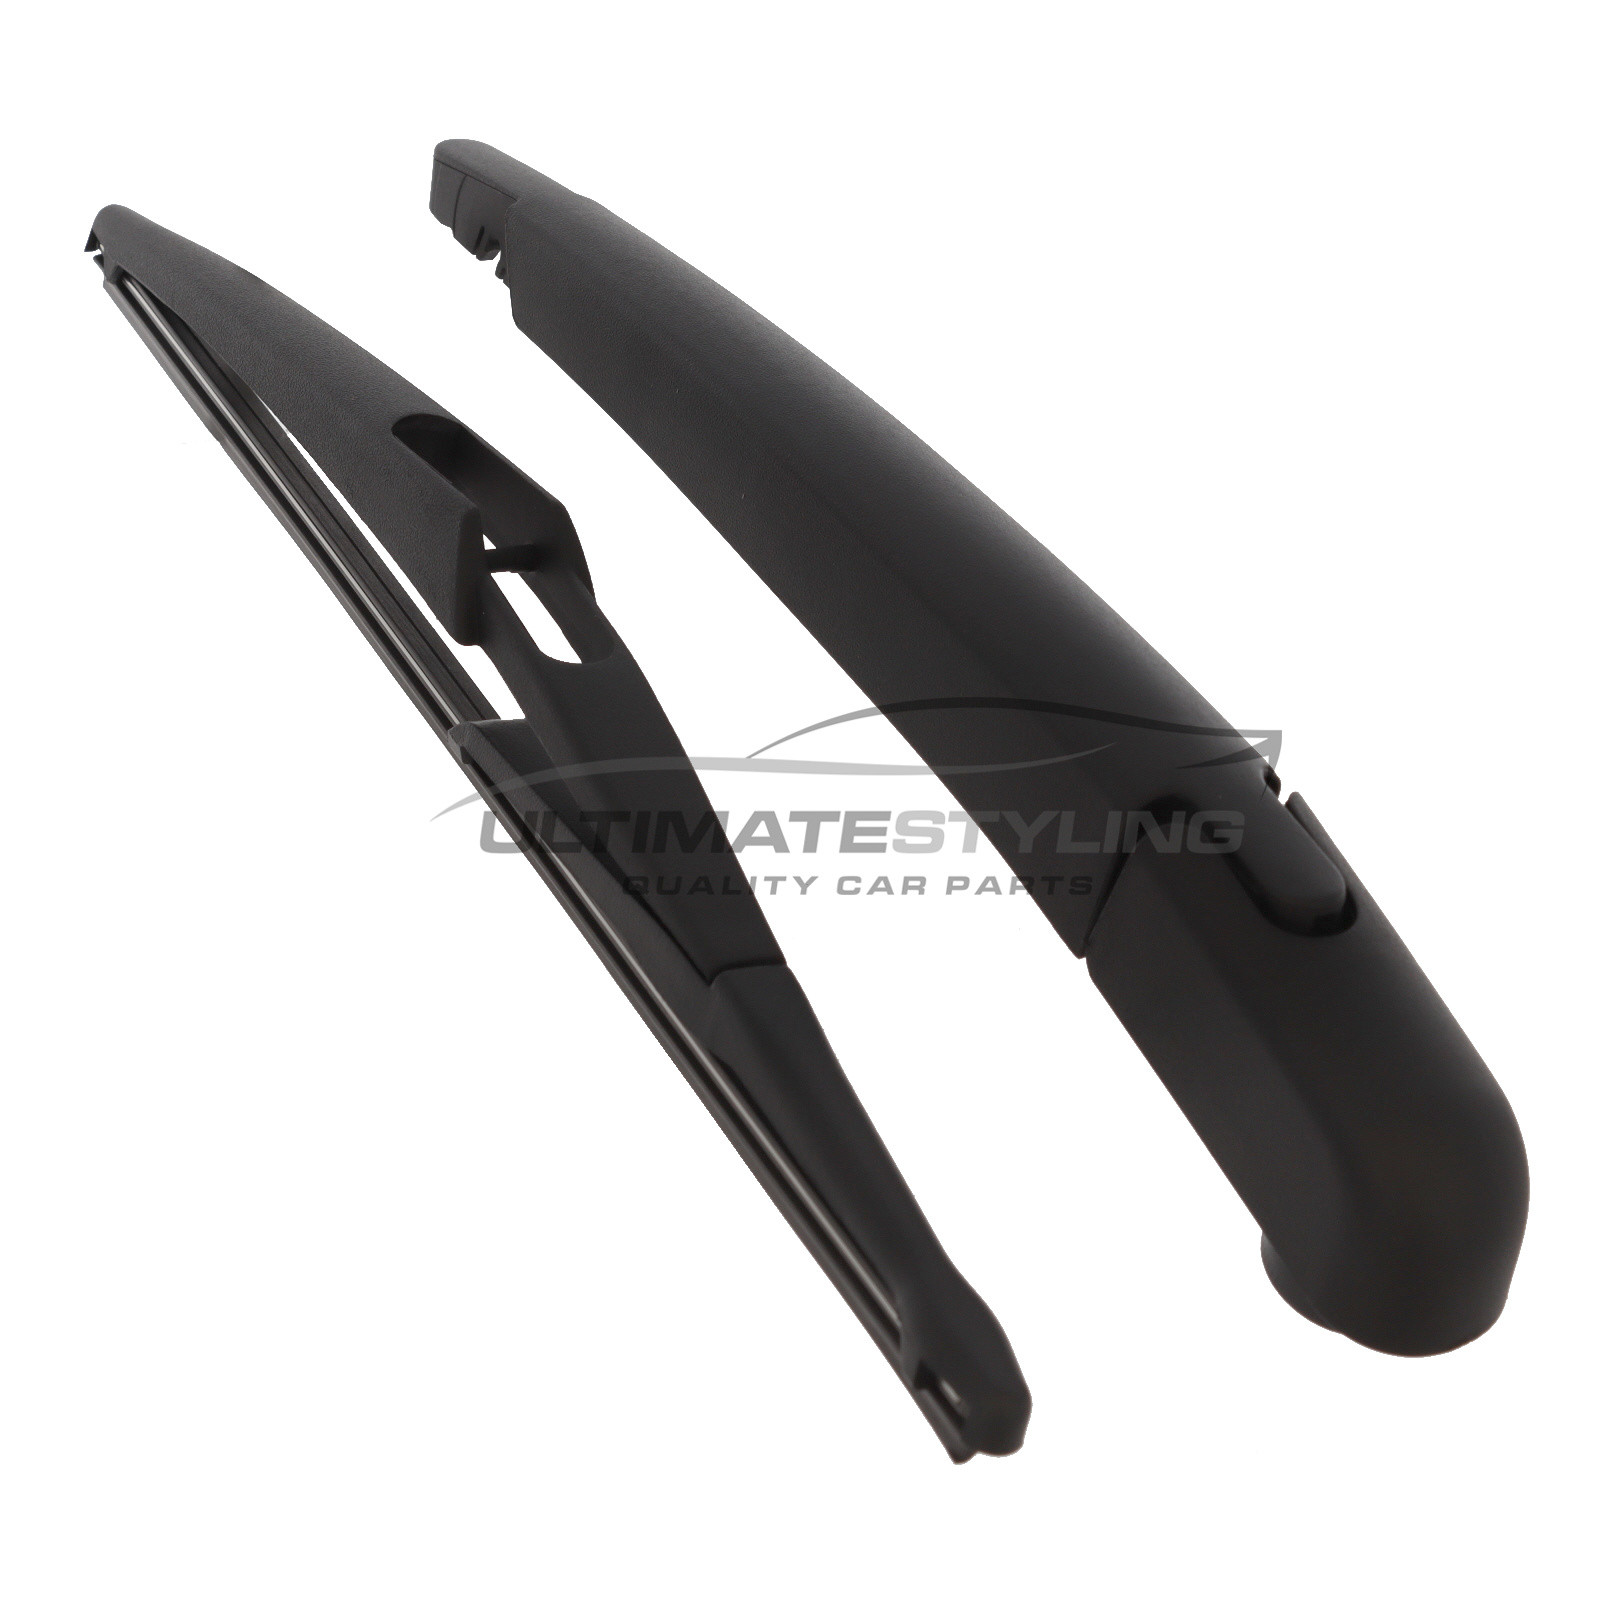 Rear Wiper Arm & Blade Set for Ford B-MAX